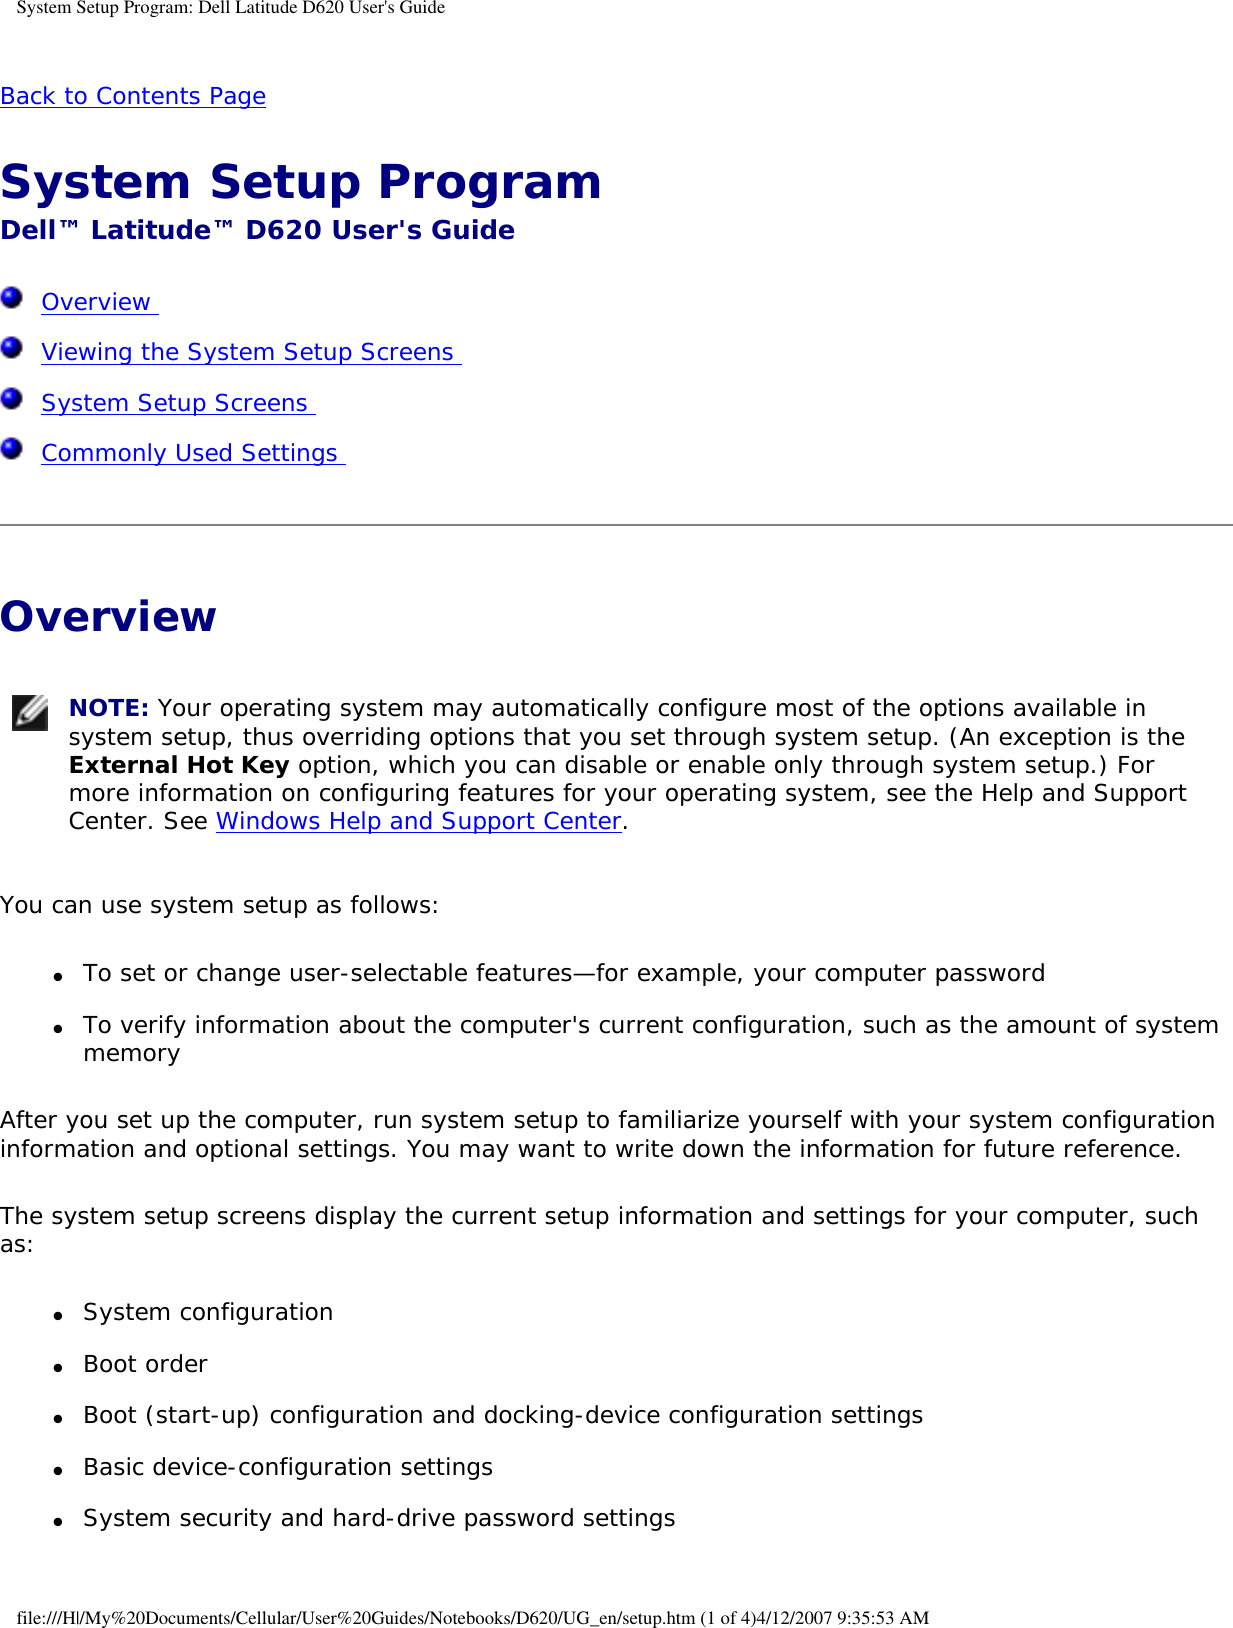 System Setup Program: Dell Latitude D620 User&apos;s GuideBack to Contents Page System Setup Program Dell™ Latitude™ D620 User&apos;s Guide  Overview   Viewing the System Setup Screens   System Setup Screens   Commonly Used Settings  Overview  NOTE: Your operating system may automatically configure most of the options available in system setup, thus overriding options that you set through system setup. (An exception is the External Hot Key option, which you can disable or enable only through system setup.) For more information on configuring features for your operating system, see the Help and Support Center. See Windows Help and Support Center.You can use system setup as follows:●     To set or change user-selectable features—for example, your computer password  ●     To verify information about the computer&apos;s current configuration, such as the amount of system memory  After you set up the computer, run system setup to familiarize yourself with your system configuration information and optional settings. You may want to write down the information for future reference.The system setup screens display the current setup information and settings for your computer, such as:●     System configuration  ●     Boot order  ●     Boot (start-up) configuration and docking-device configuration settings  ●     Basic device-configuration settings  ●     System security and hard-drive password settings  file:///H|/My%20Documents/Cellular/User%20Guides/Notebooks/D620/UG_en/setup.htm (1 of 4)4/12/2007 9:35:53 AM